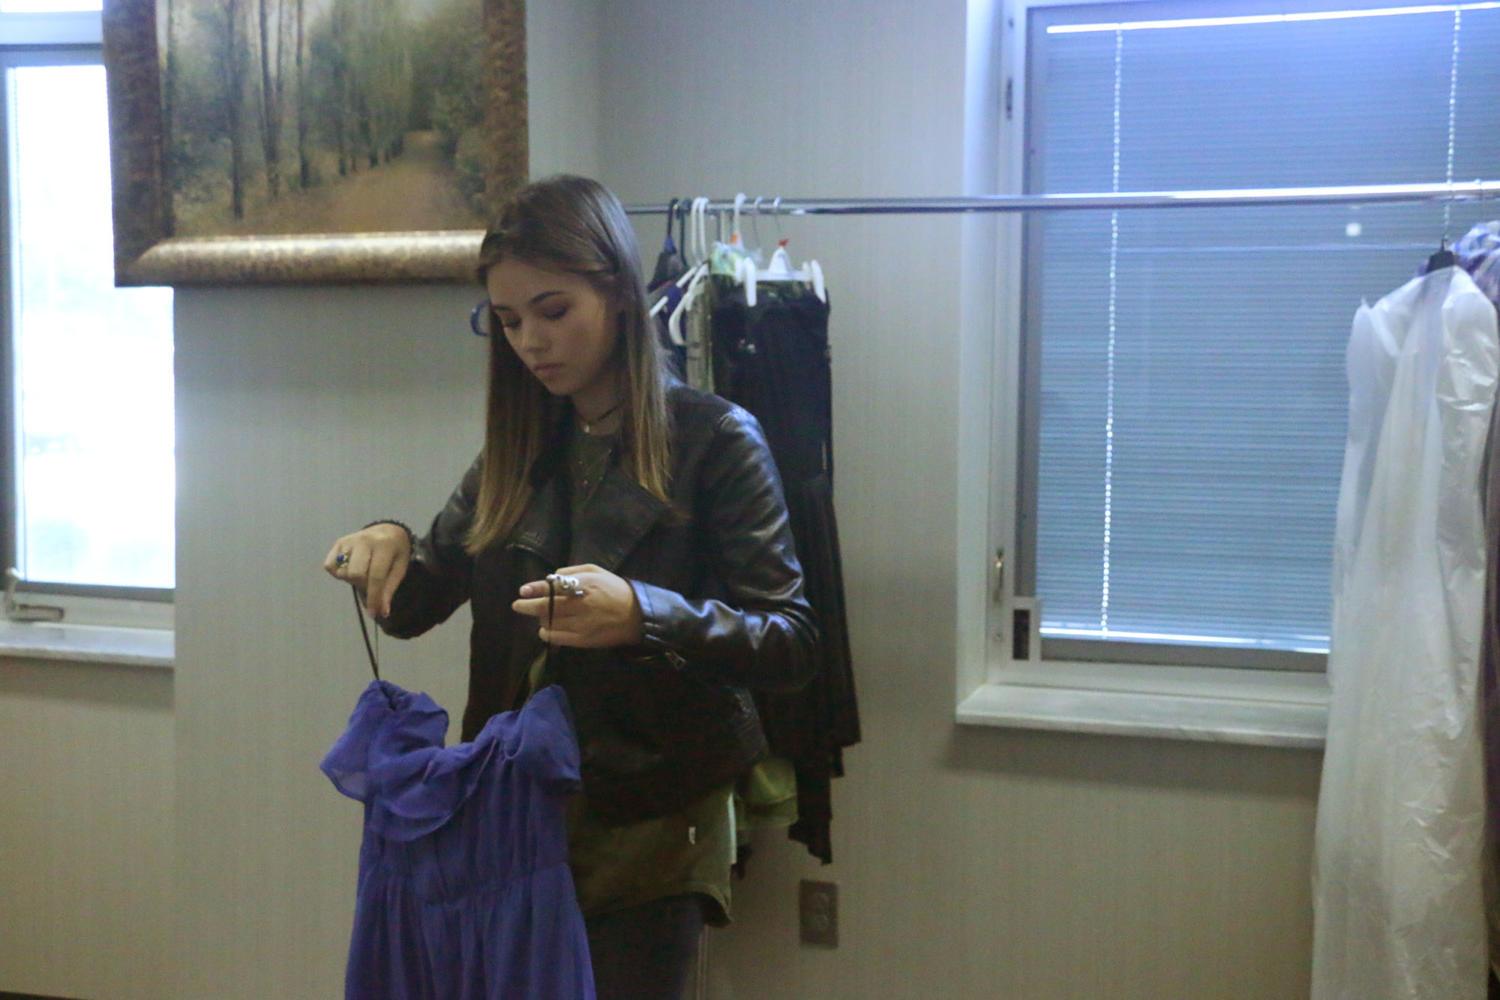 During SRT, senior Claire Estabrook sorts through dresses and puts them on a rack in size order. Since her freshman year, Estabrook has donated her dresses from homecoming and Prom to the dress drive. “They’re nice dresses, and I’m only going to wear them once, so why not have someone else wear them?” said Estabrook.